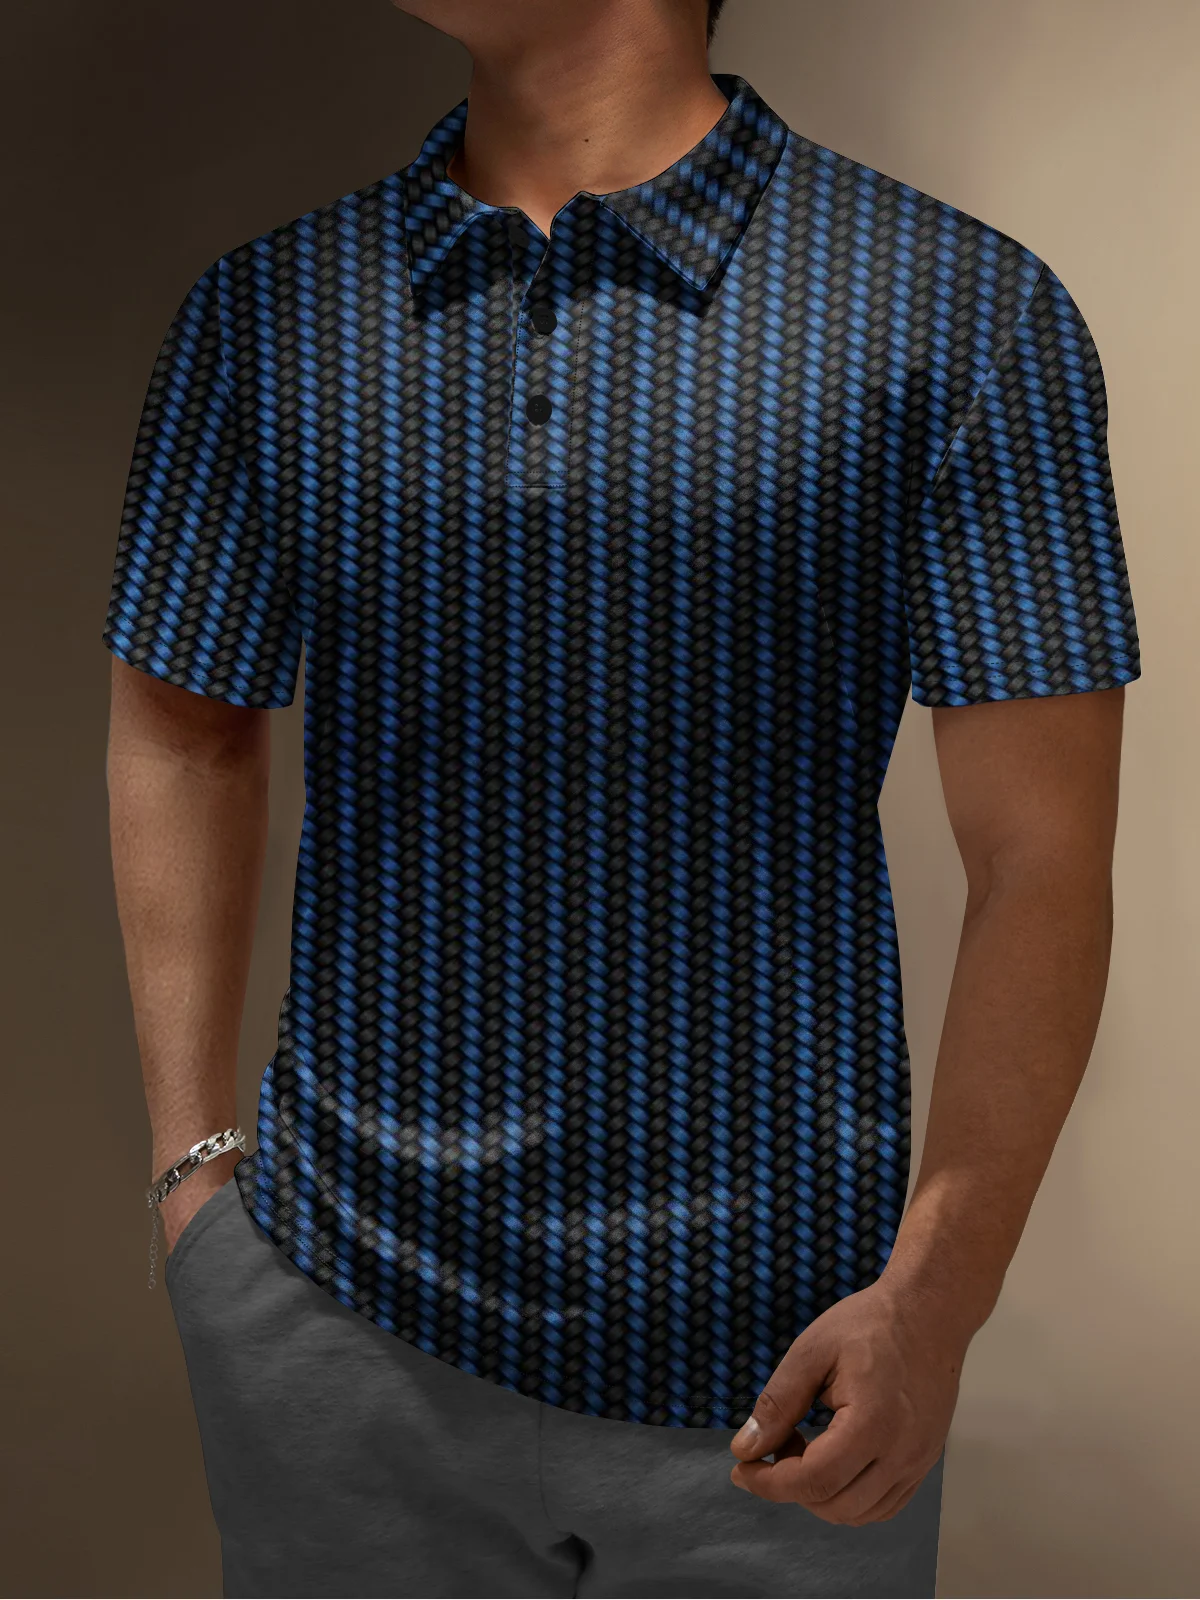 Hardaddy Moisture Wicking Golf Polo 3D Abstract Gradient Color Geometry